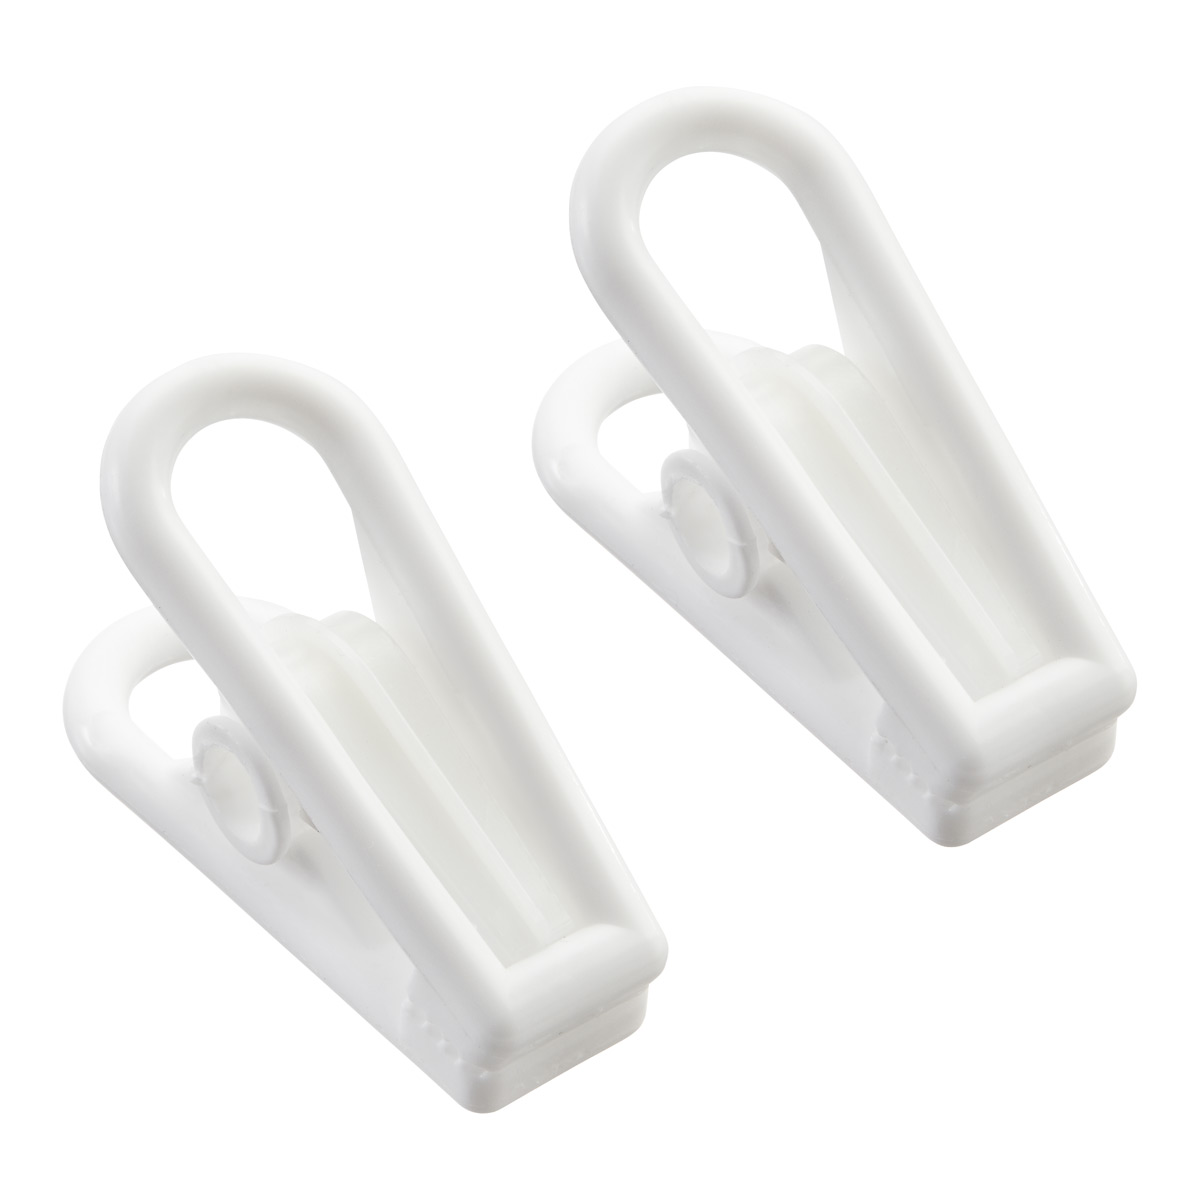 https://www.containerstore.com/catalogimages/292771/776300SuperHoldClipsWhite_1200.jpg